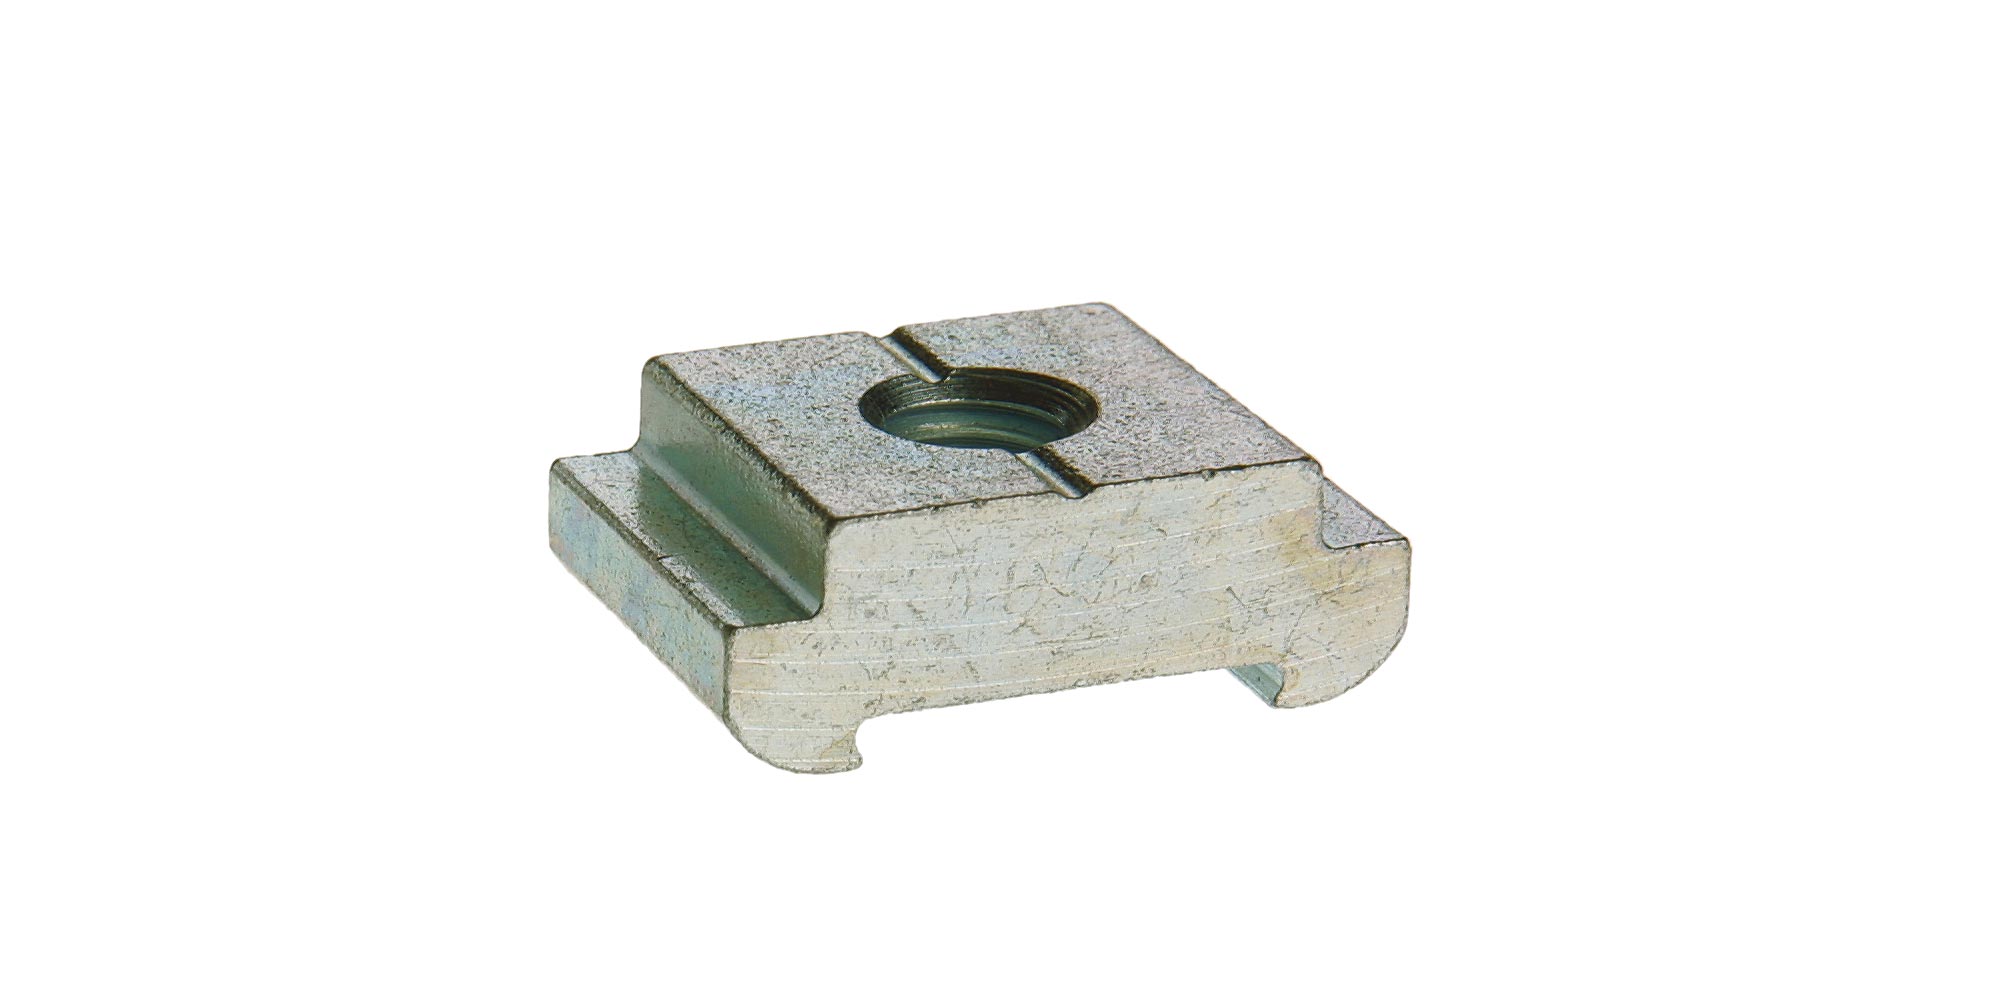 Sliding blocks C30 M3 galvanized steel, without screw, without spring